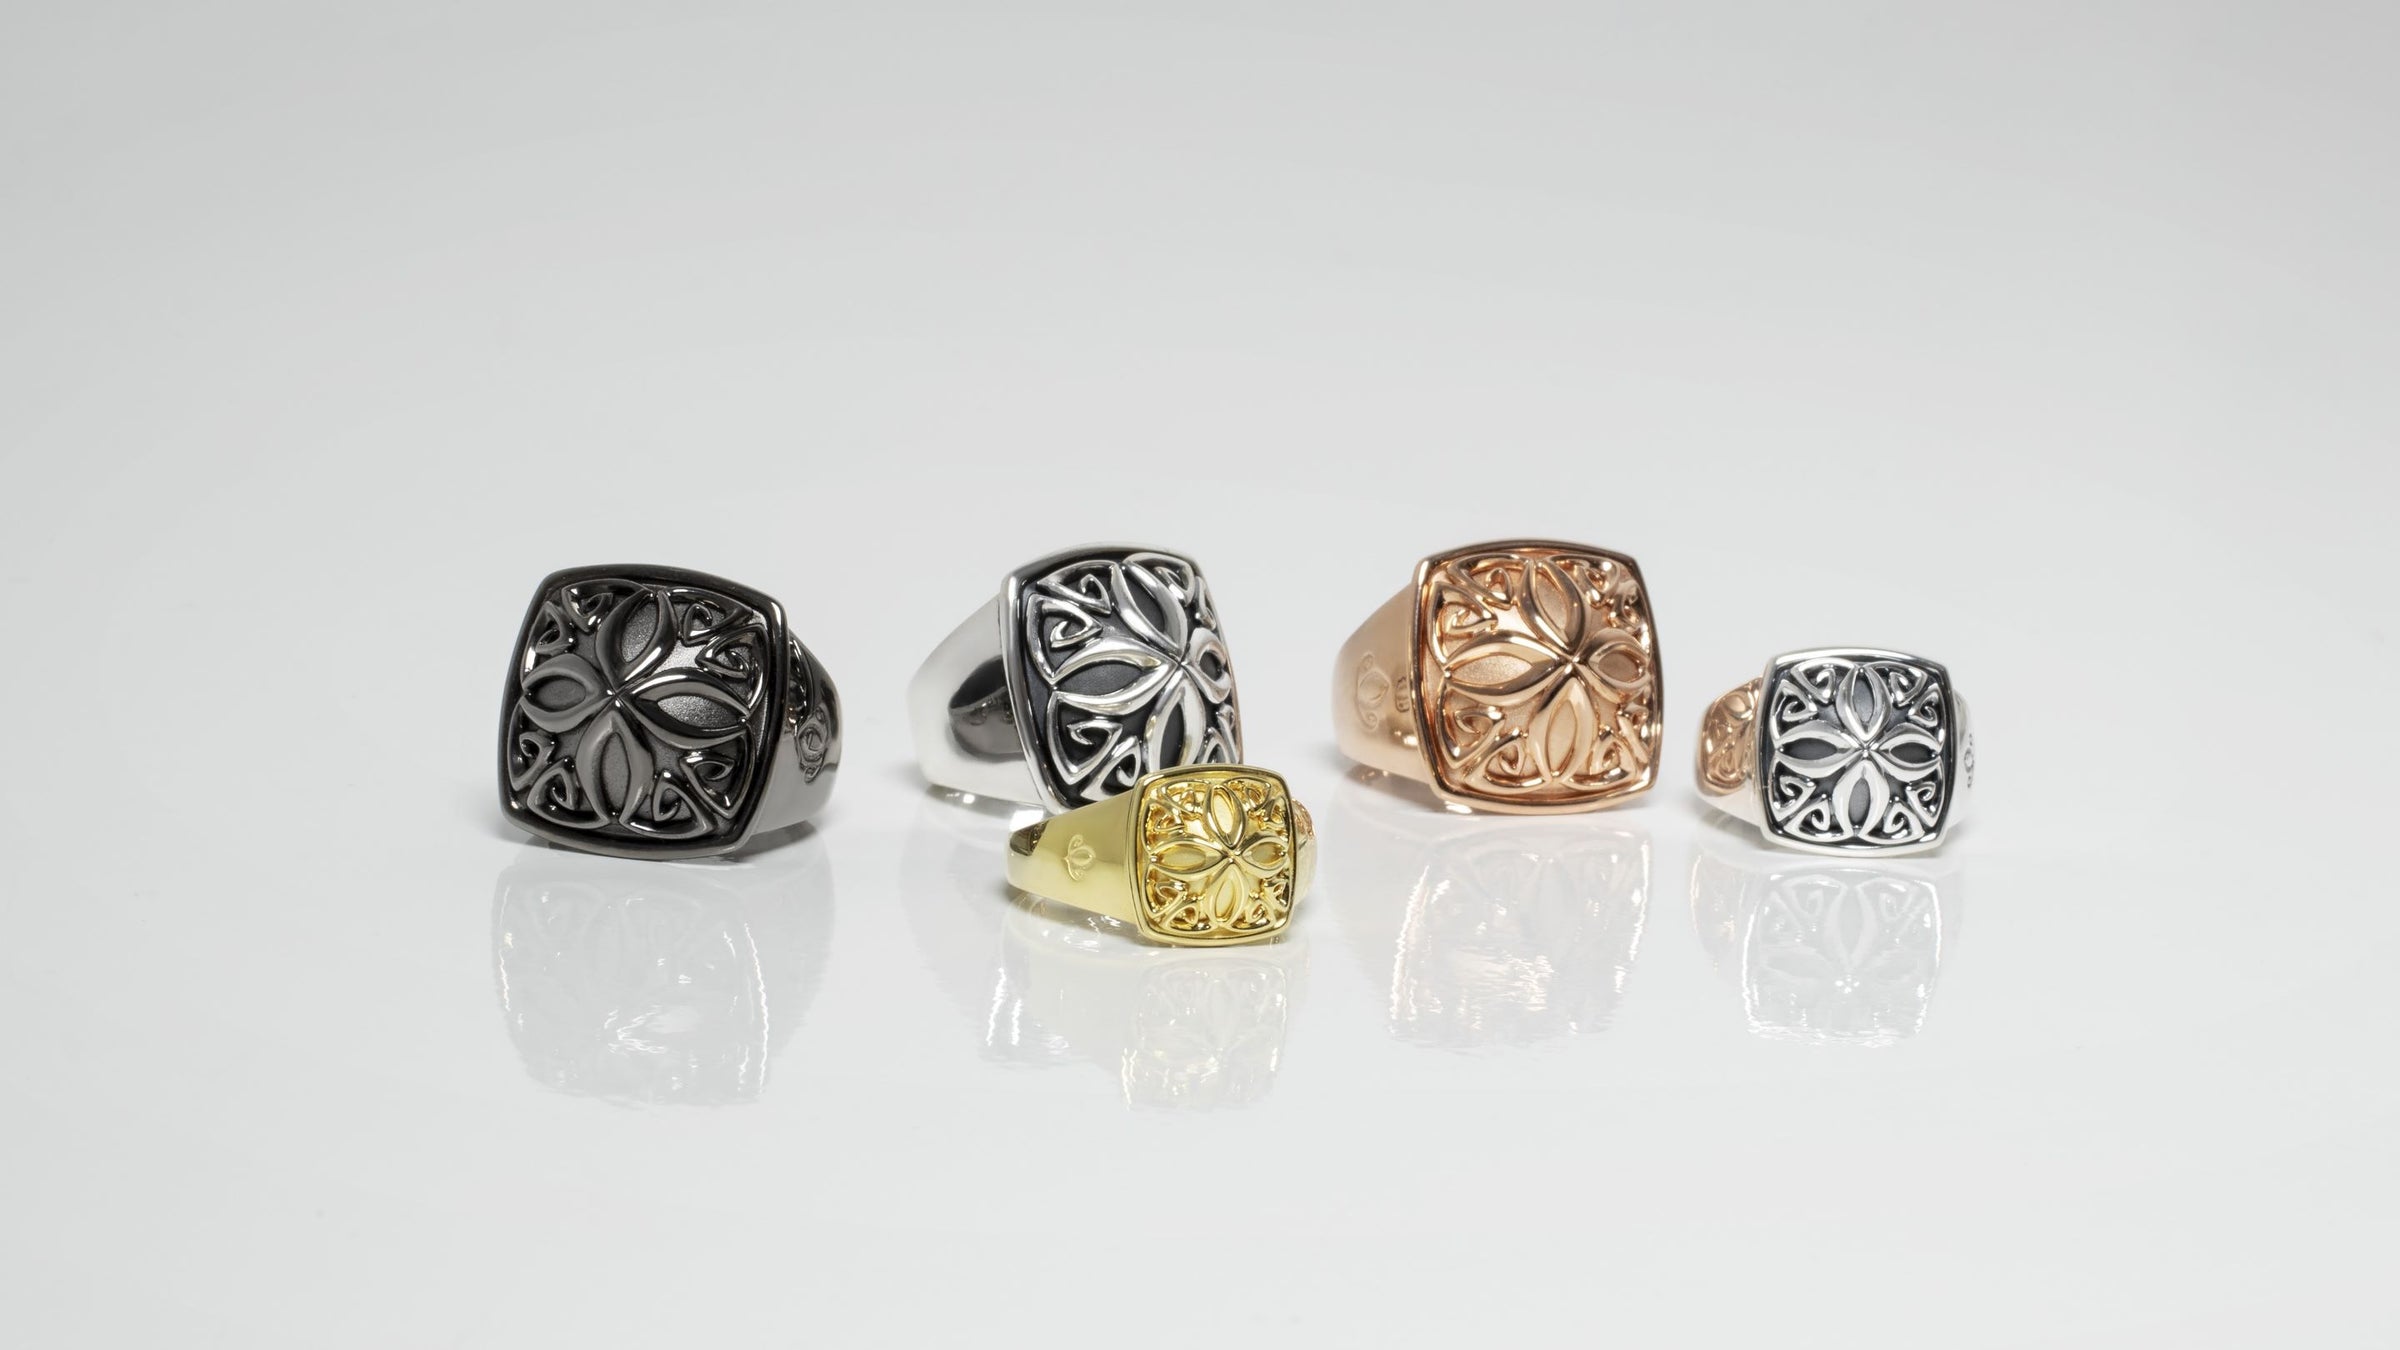 Array of Insignia signet rings in silver and gold